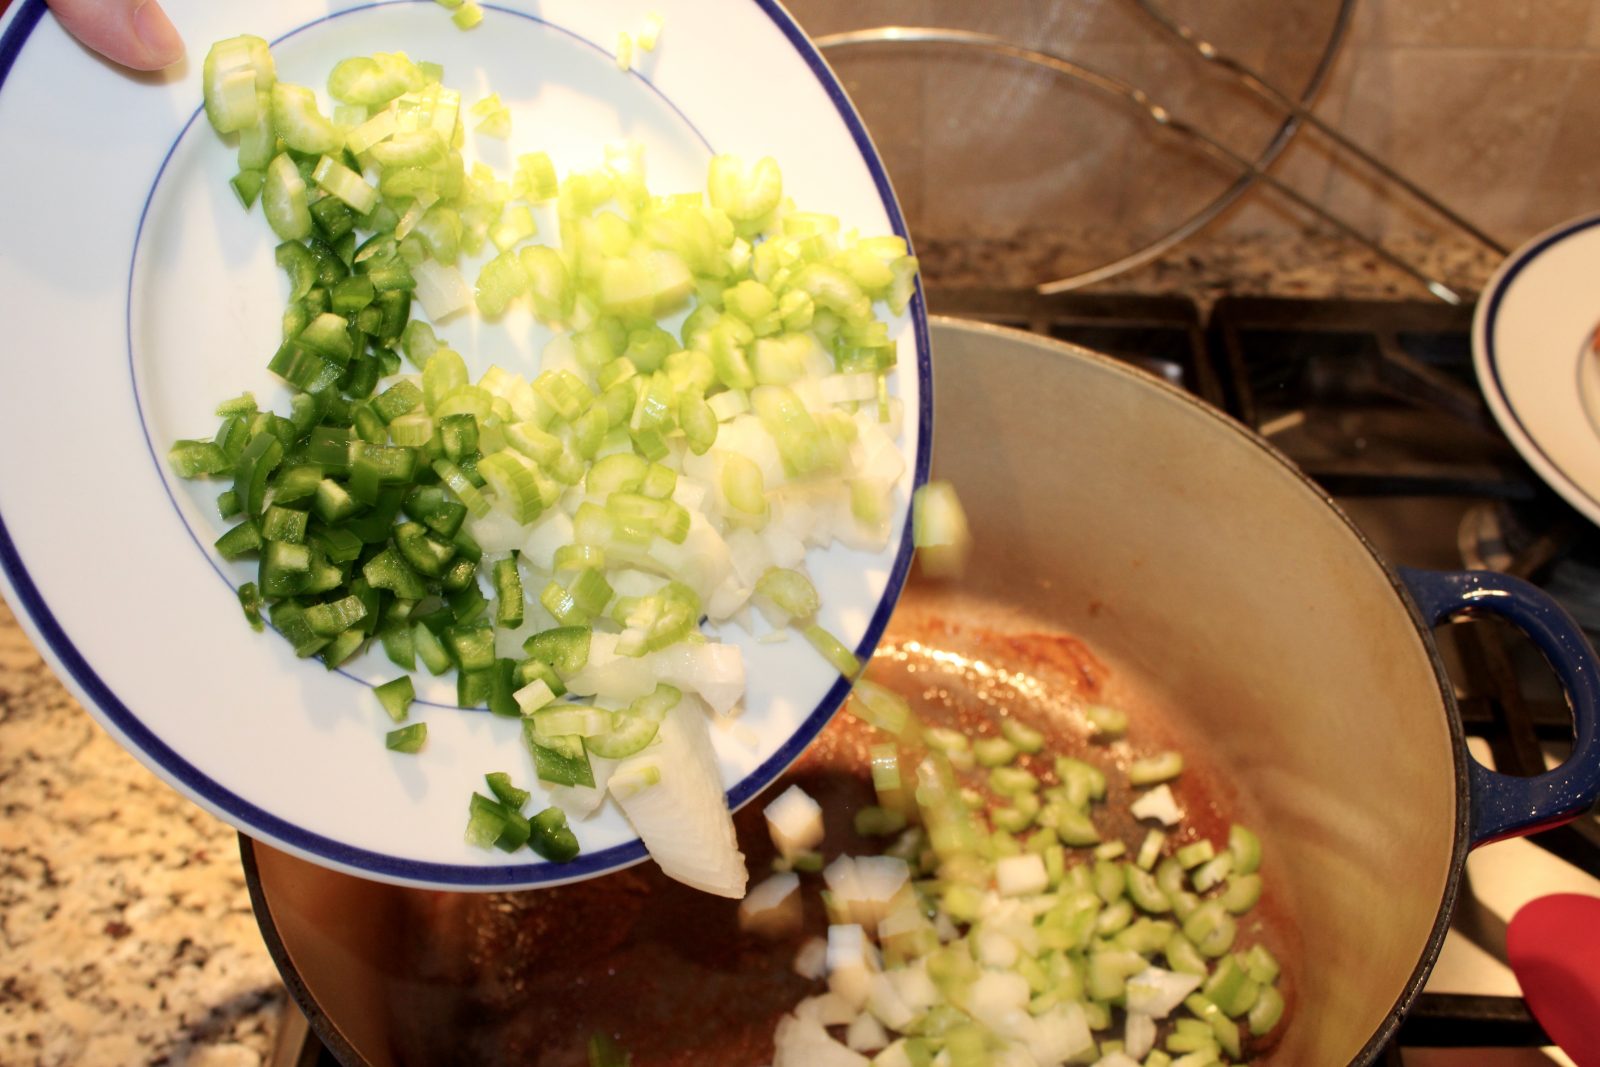 Recipe photo for White Chicken Chili showing chopped celery, onion and jalapeño being slid into pot from white plate with blue ring. The pot is on a gas stove.